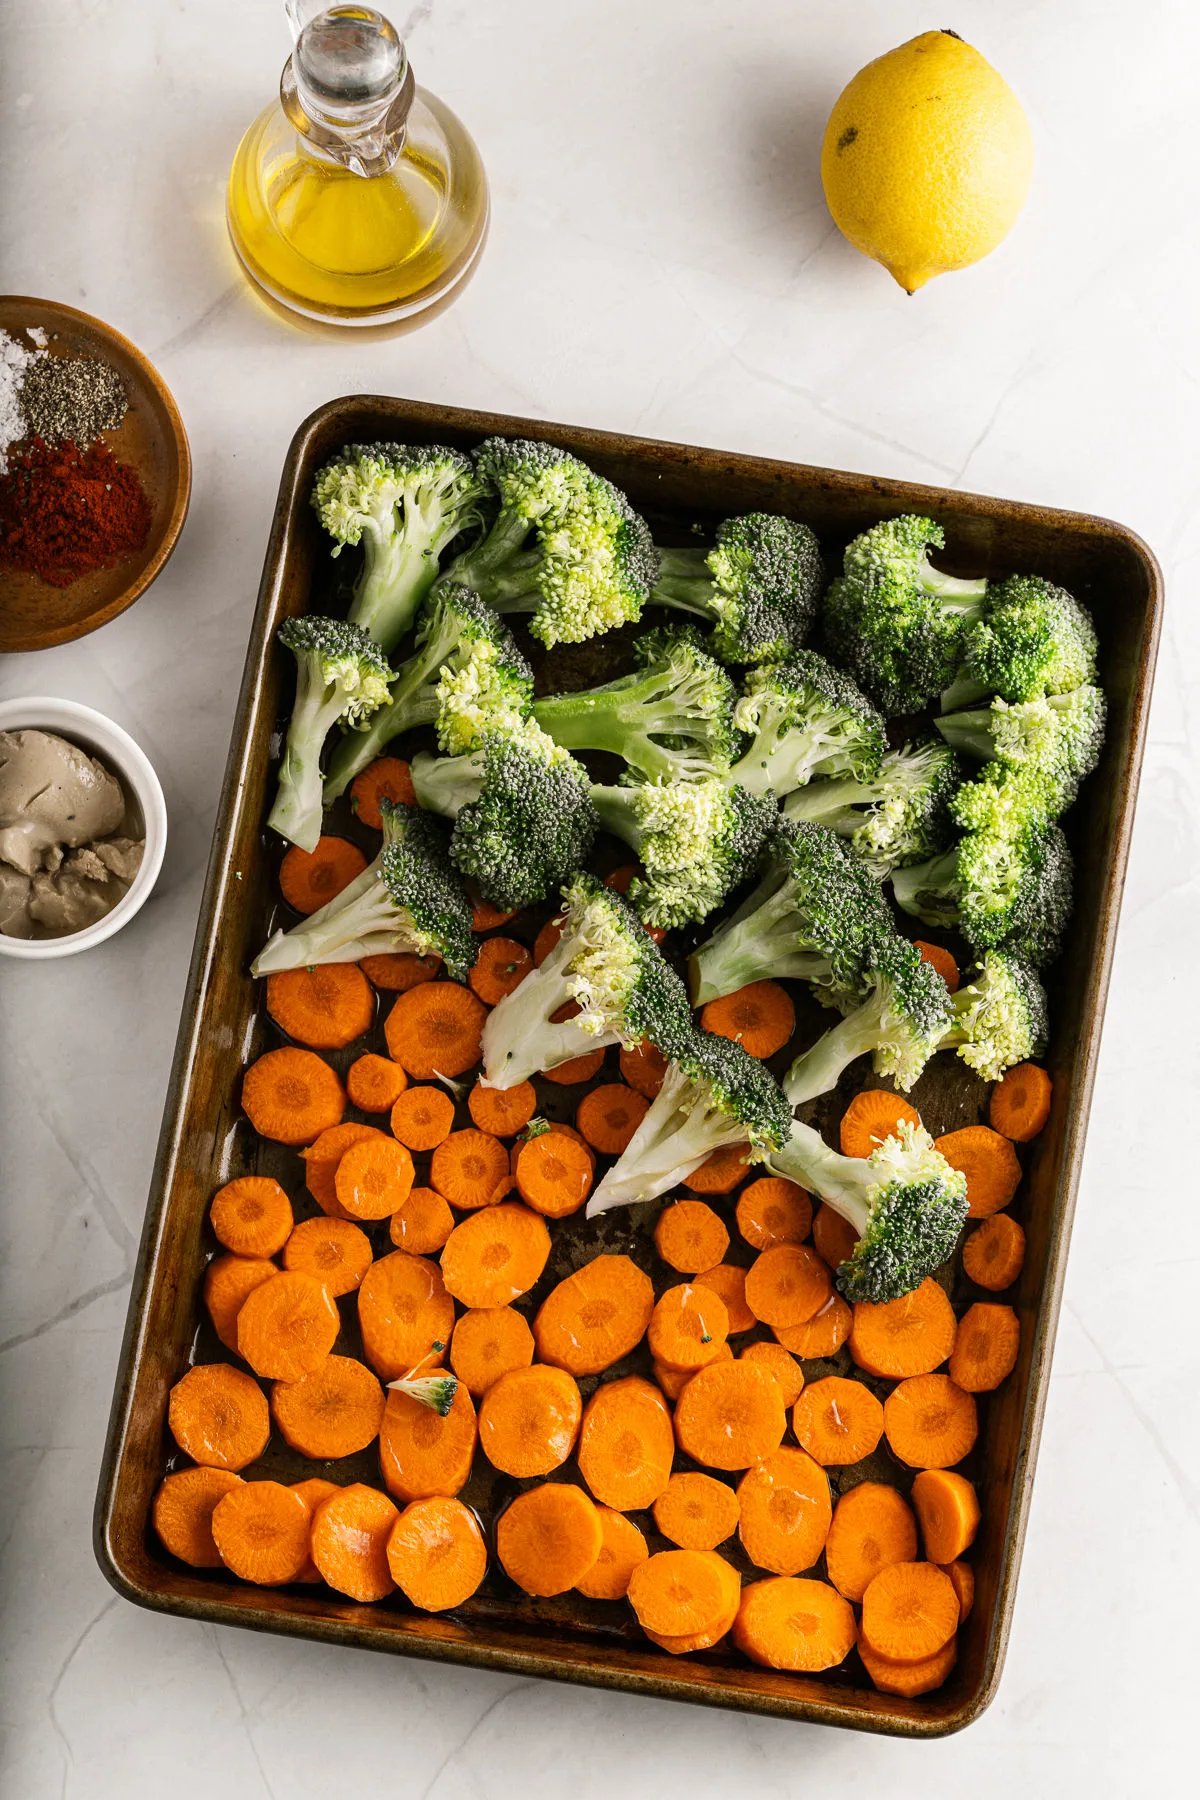 Broccoli and carrot slices on cookie sheet for roasting.